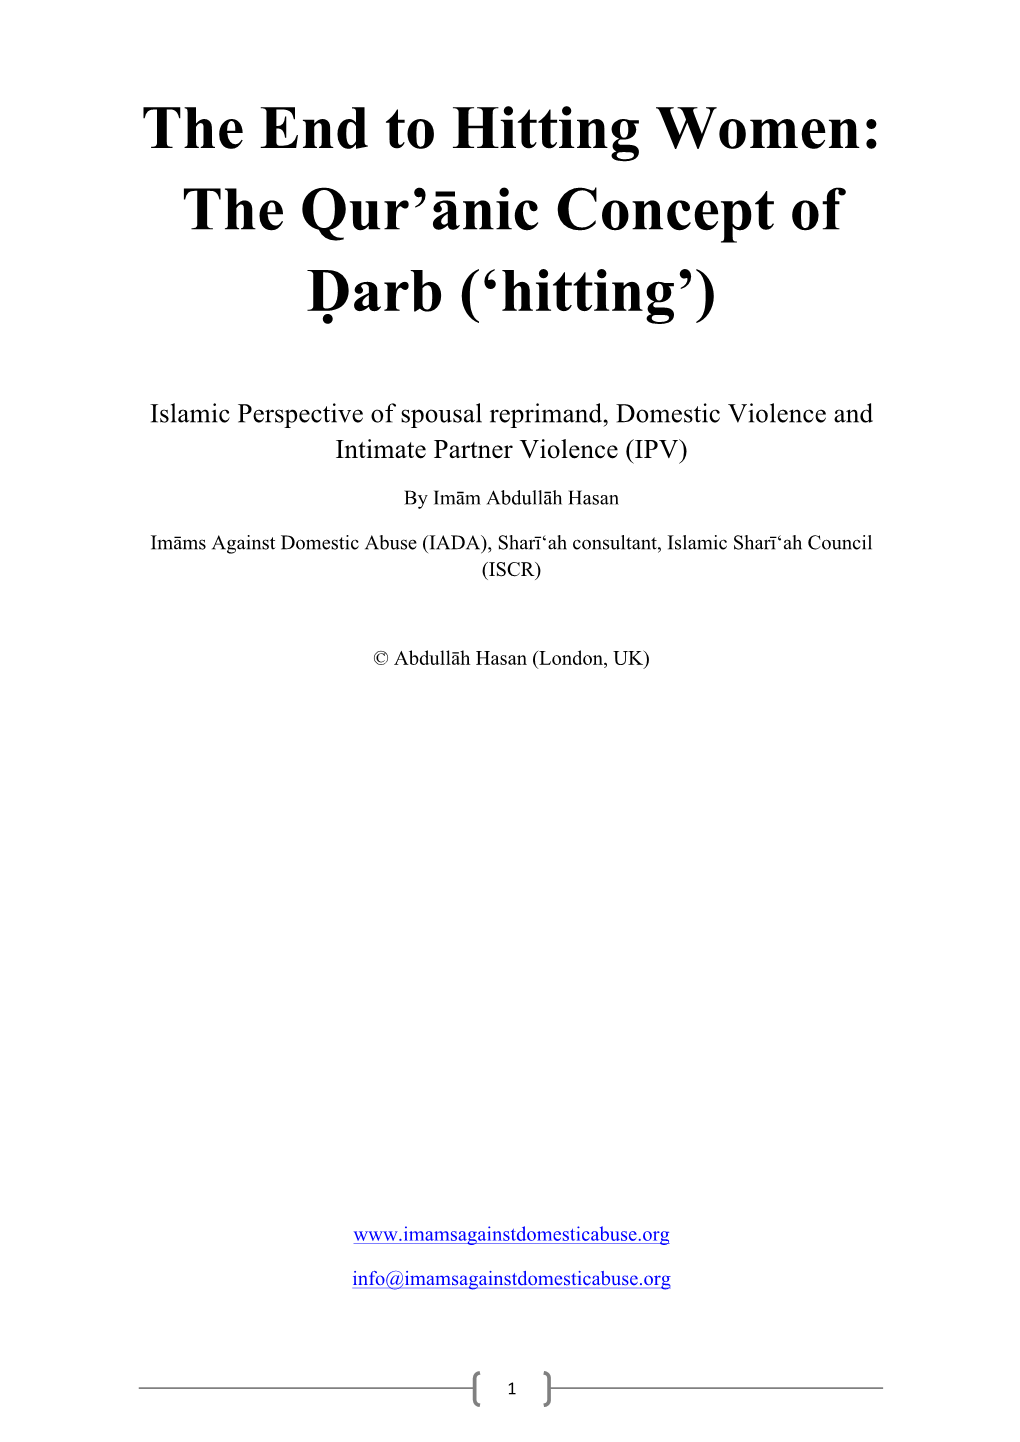 The End to Hitting Women: the Qur’Ānic Concept of Ḍarb (‘Hitting’)